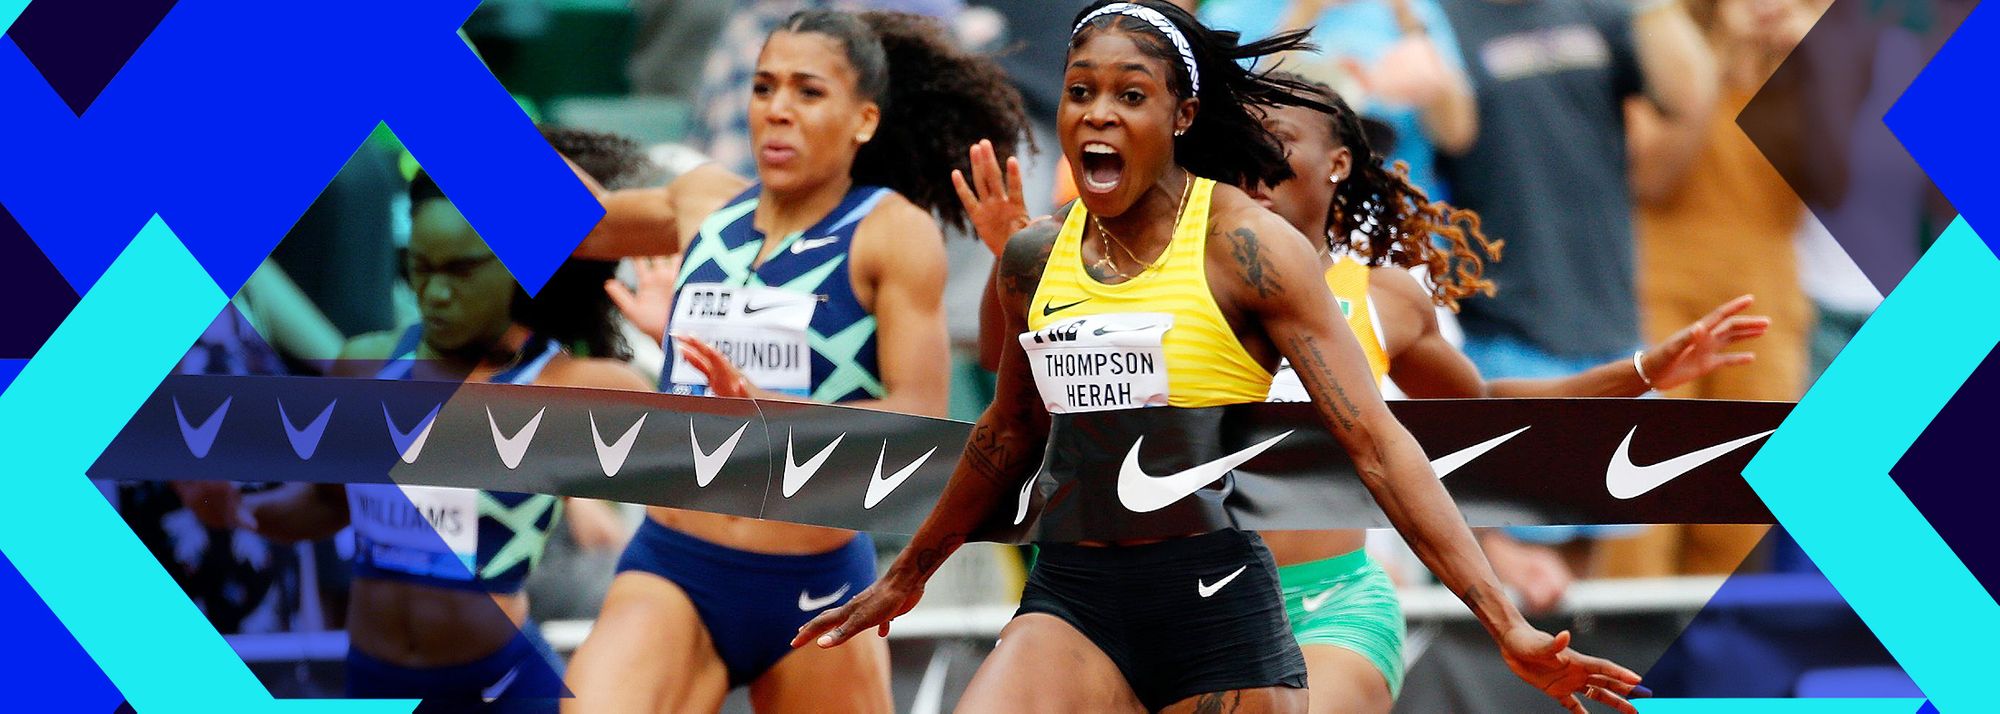 Insanely deep fields assembled for the Prefontaine Classic